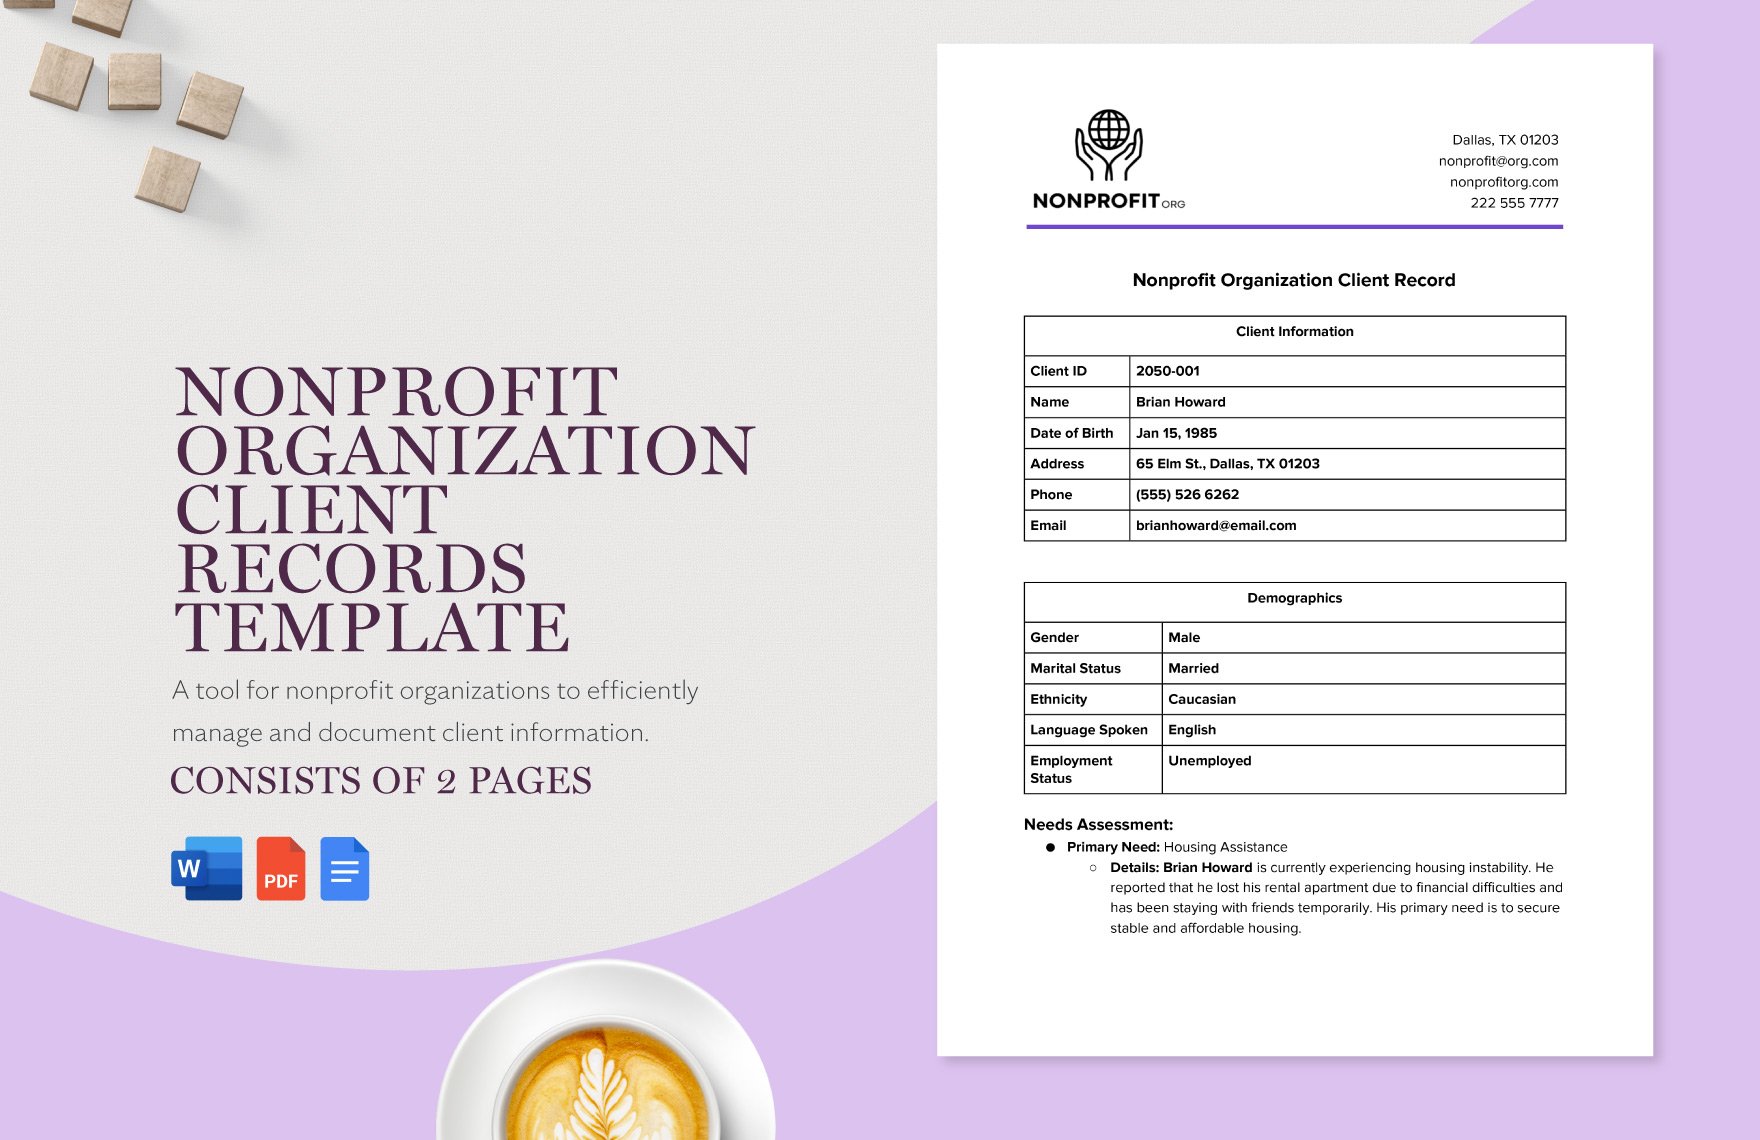 Nonprofit Organization Client Records Template in Word, Google Docs, PDF